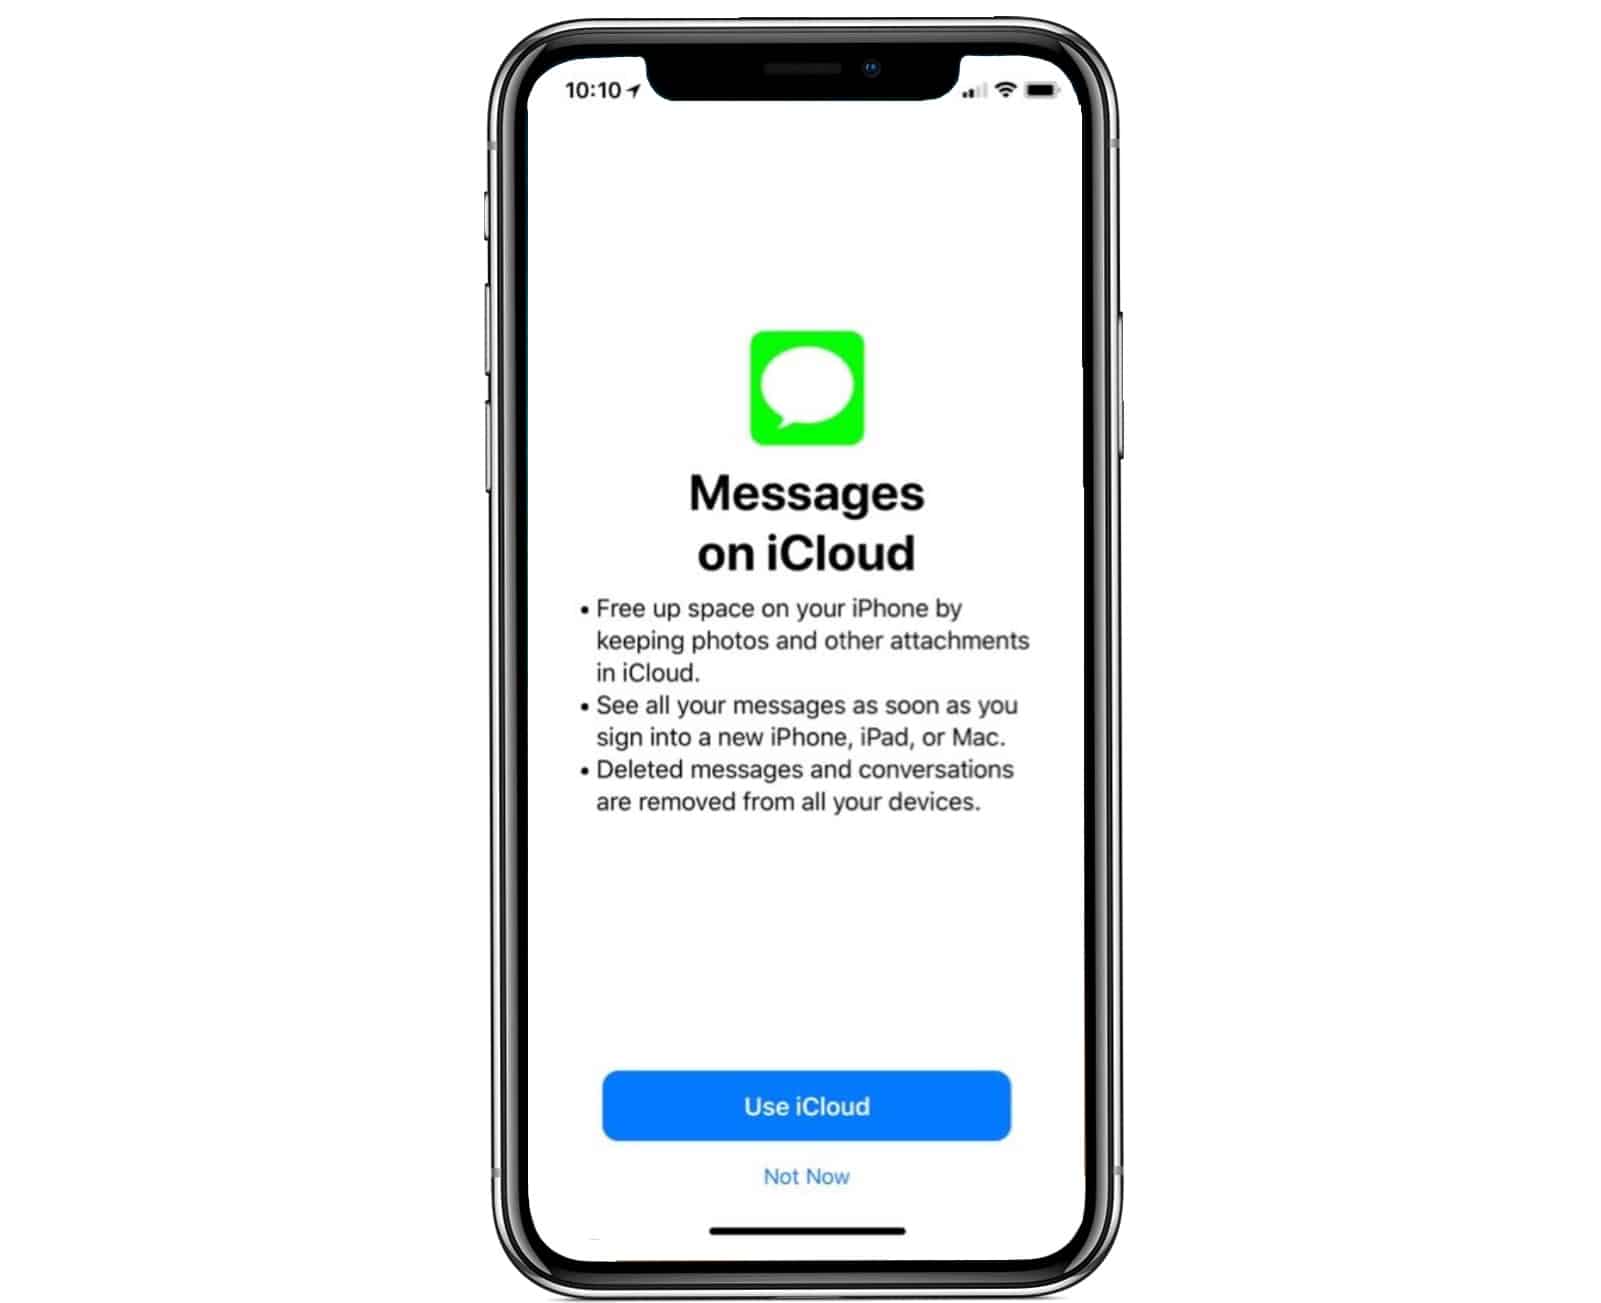 iMessages in iCloud is coming in iOS 11.3.